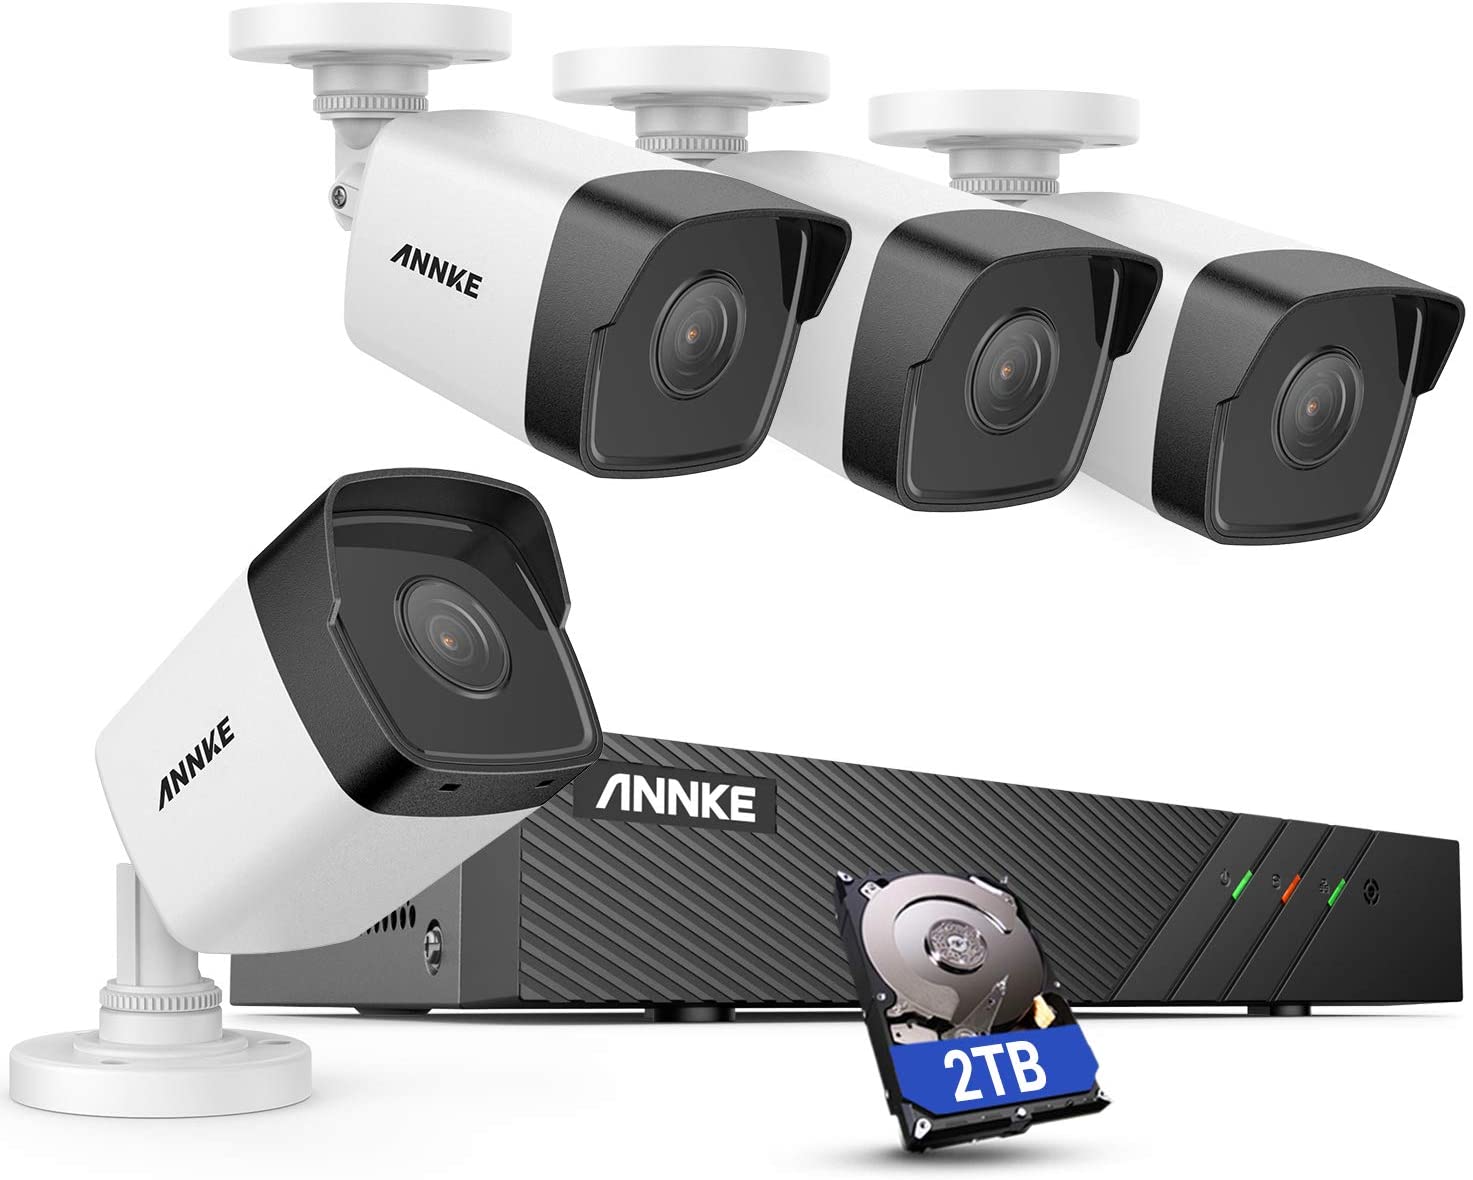 ANNKE H500 8CH Bullet PoE Home Security Camera System with 6MP H.265+ NVR, 4X 5MP Outdoor CCTV IP Camera, 2TB HDD $319.99 W/ FS